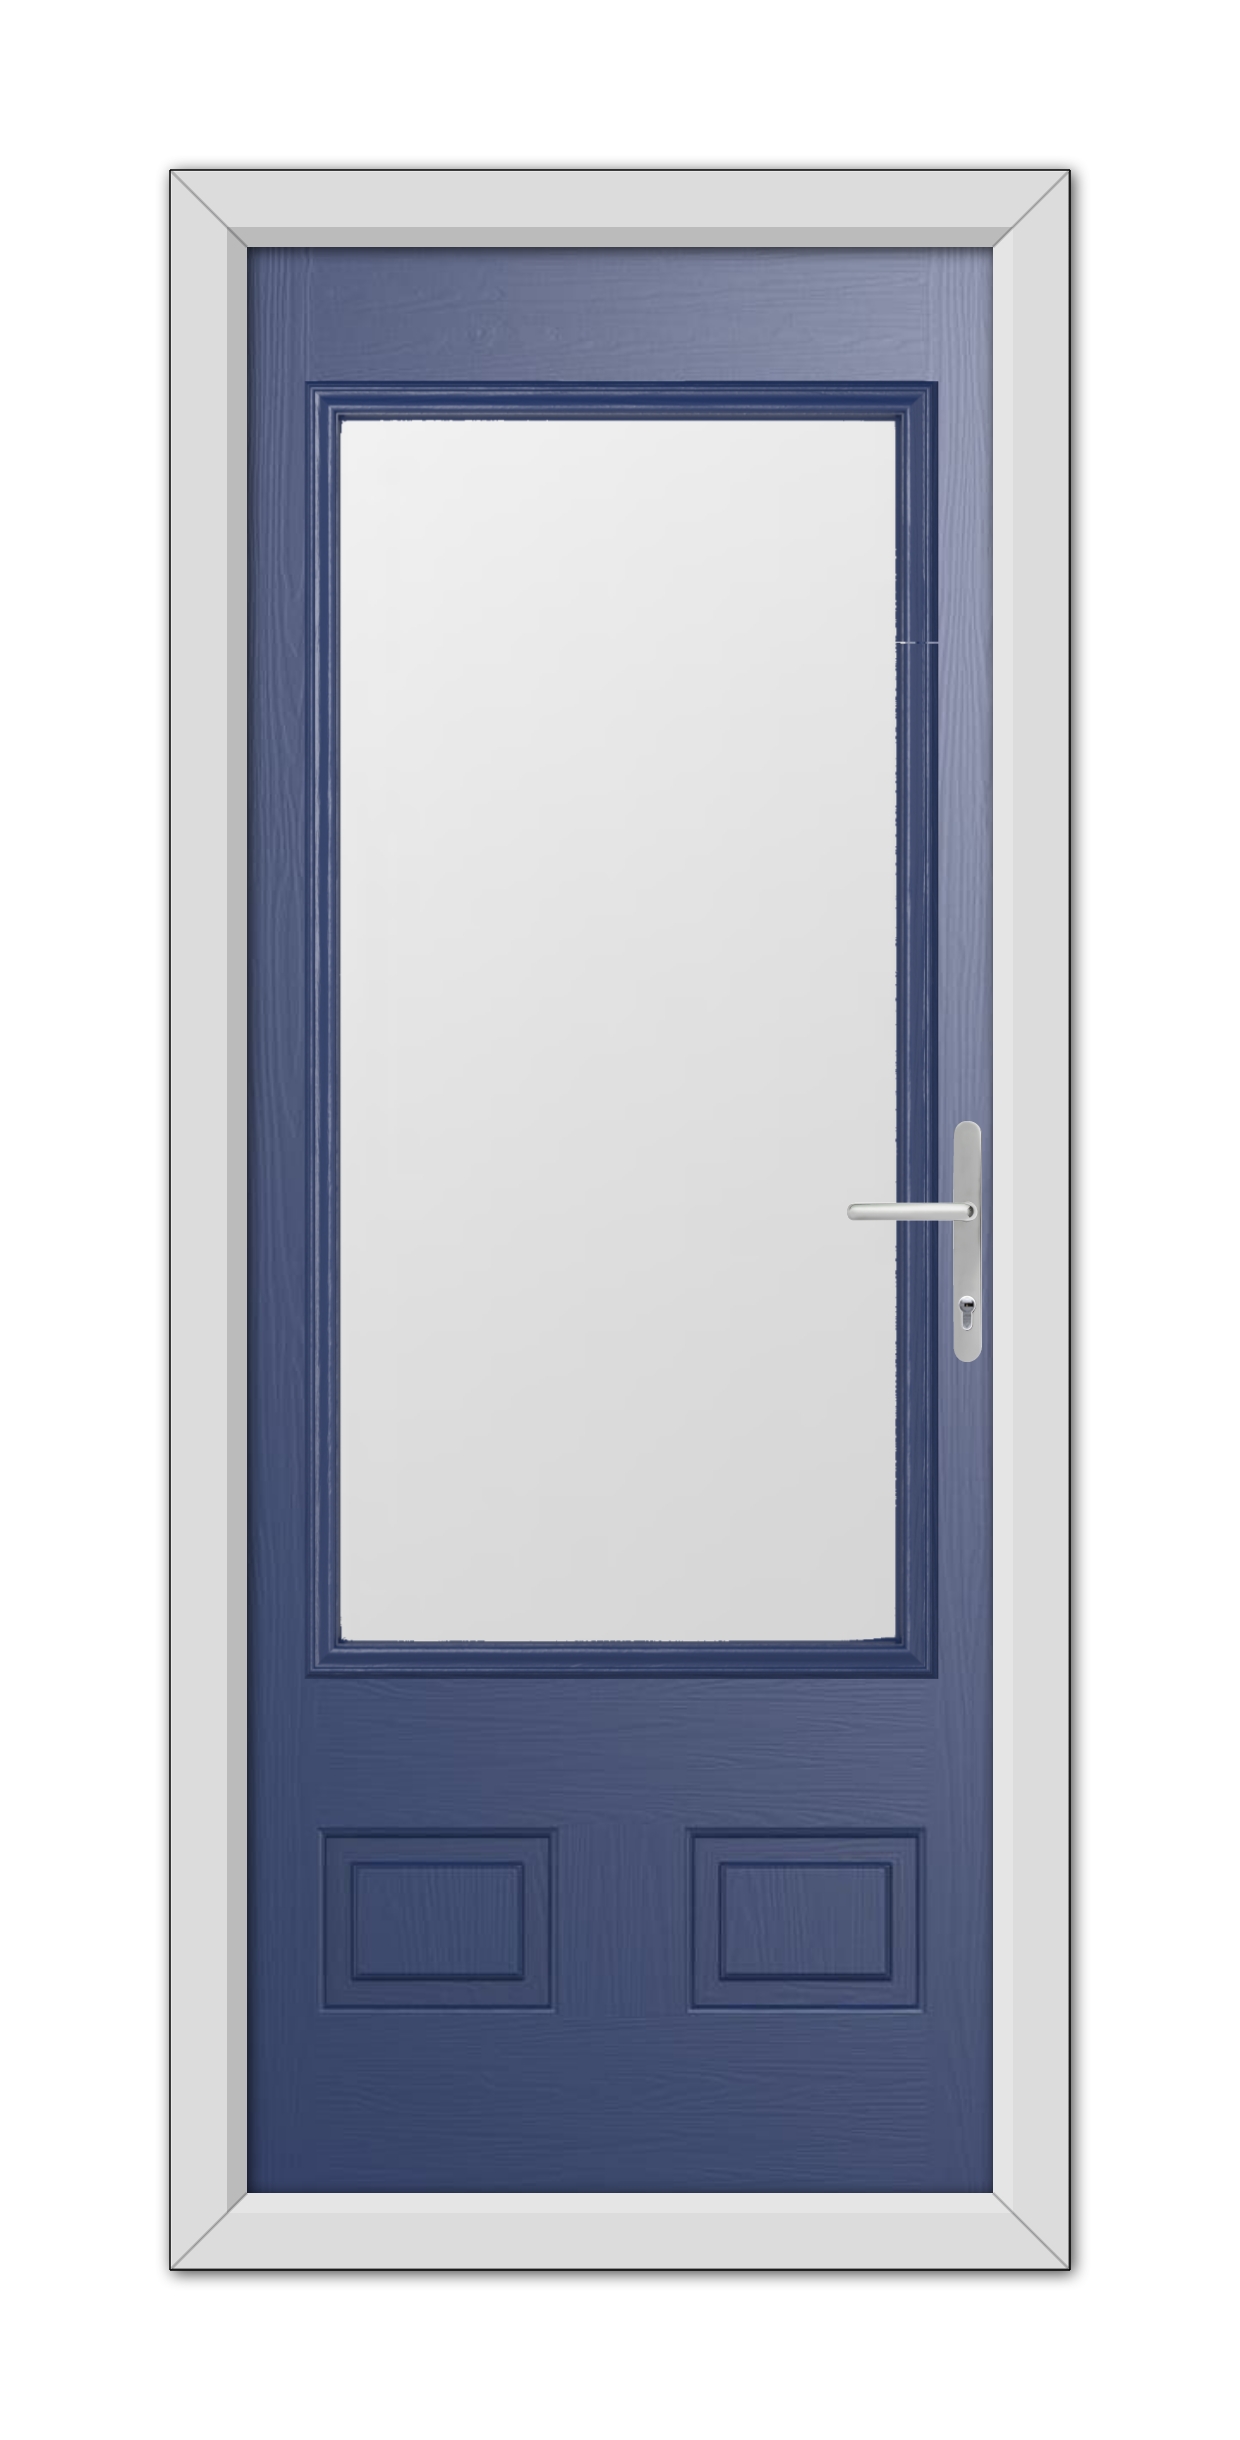 A Blue Walcot Composite Door 48mm Timber Core with a white frame, featuring a large central panel, two smaller bottom panels, and a metallic handle on the right.